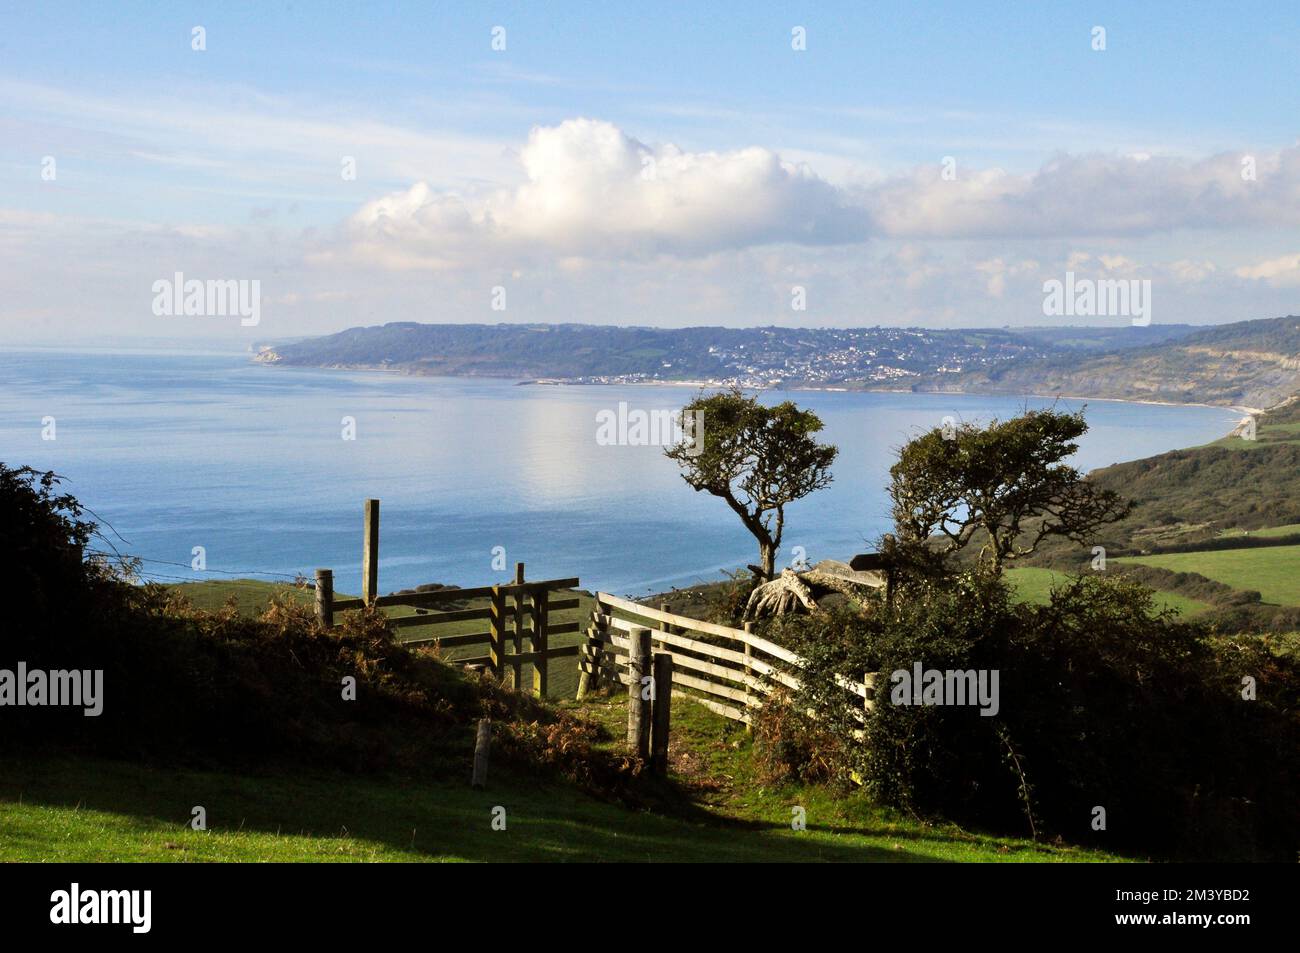 A distant autumn view of Lyme Regis on the coast of Dorset from the path around Golden Cap the highest point on the Dorset coast. England Stock Photo